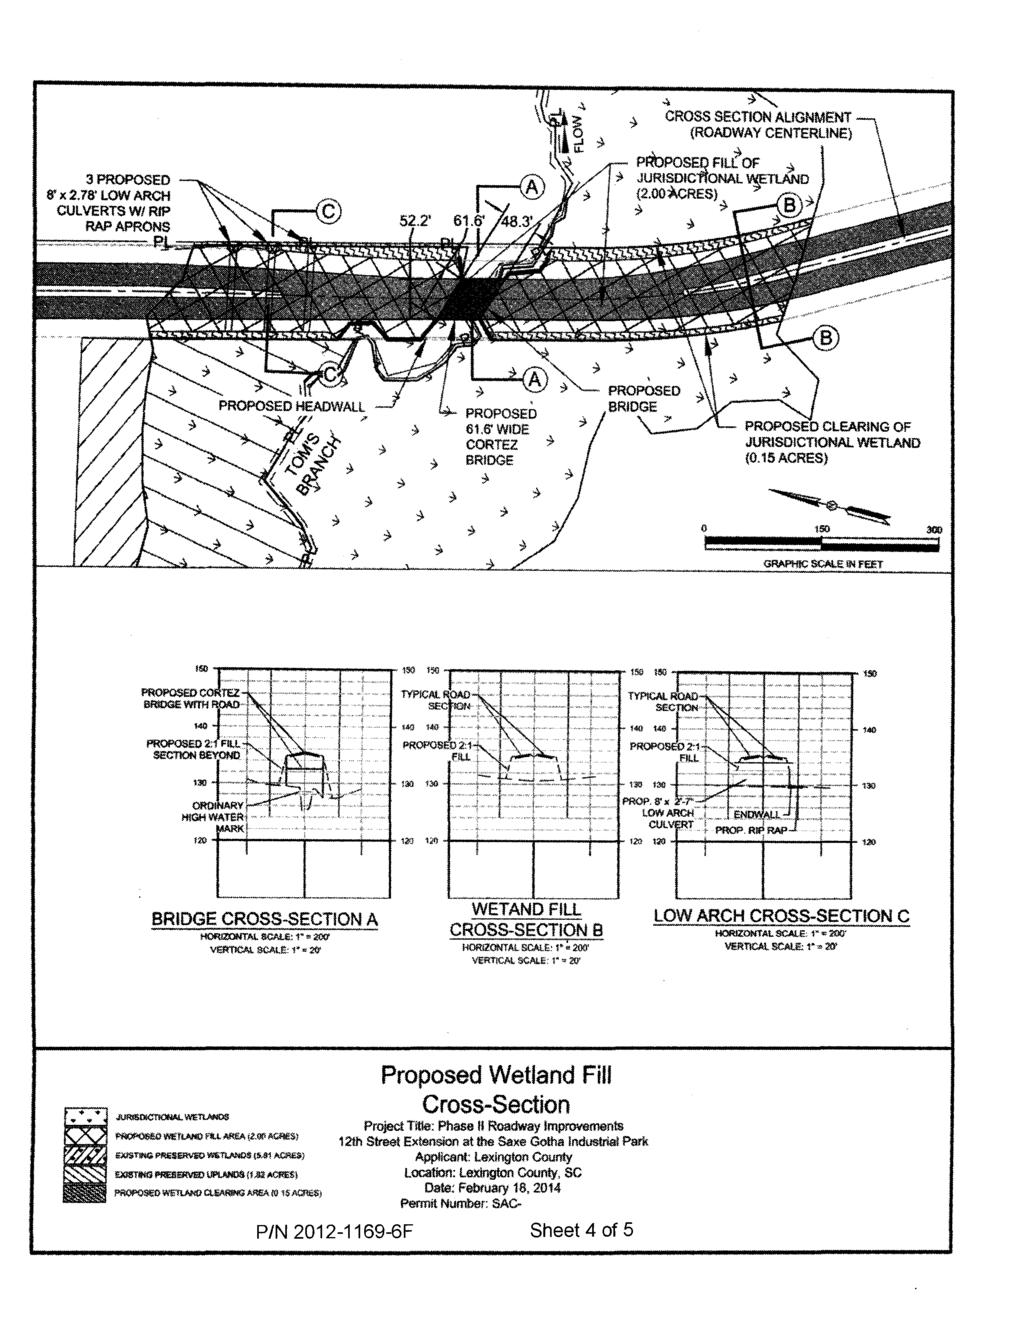 ... CROSS SECTION ALIGNMENT (ROADWAY CENTERLINE) PtroPOSEQ FILtOF 3PROPOSED JURISOIC'ffONAl 0 8' x 2.78' LOW ARCH CULVERTS W/ RIP (2.00RES), RAP APRONS. PROPOSED :* 61.